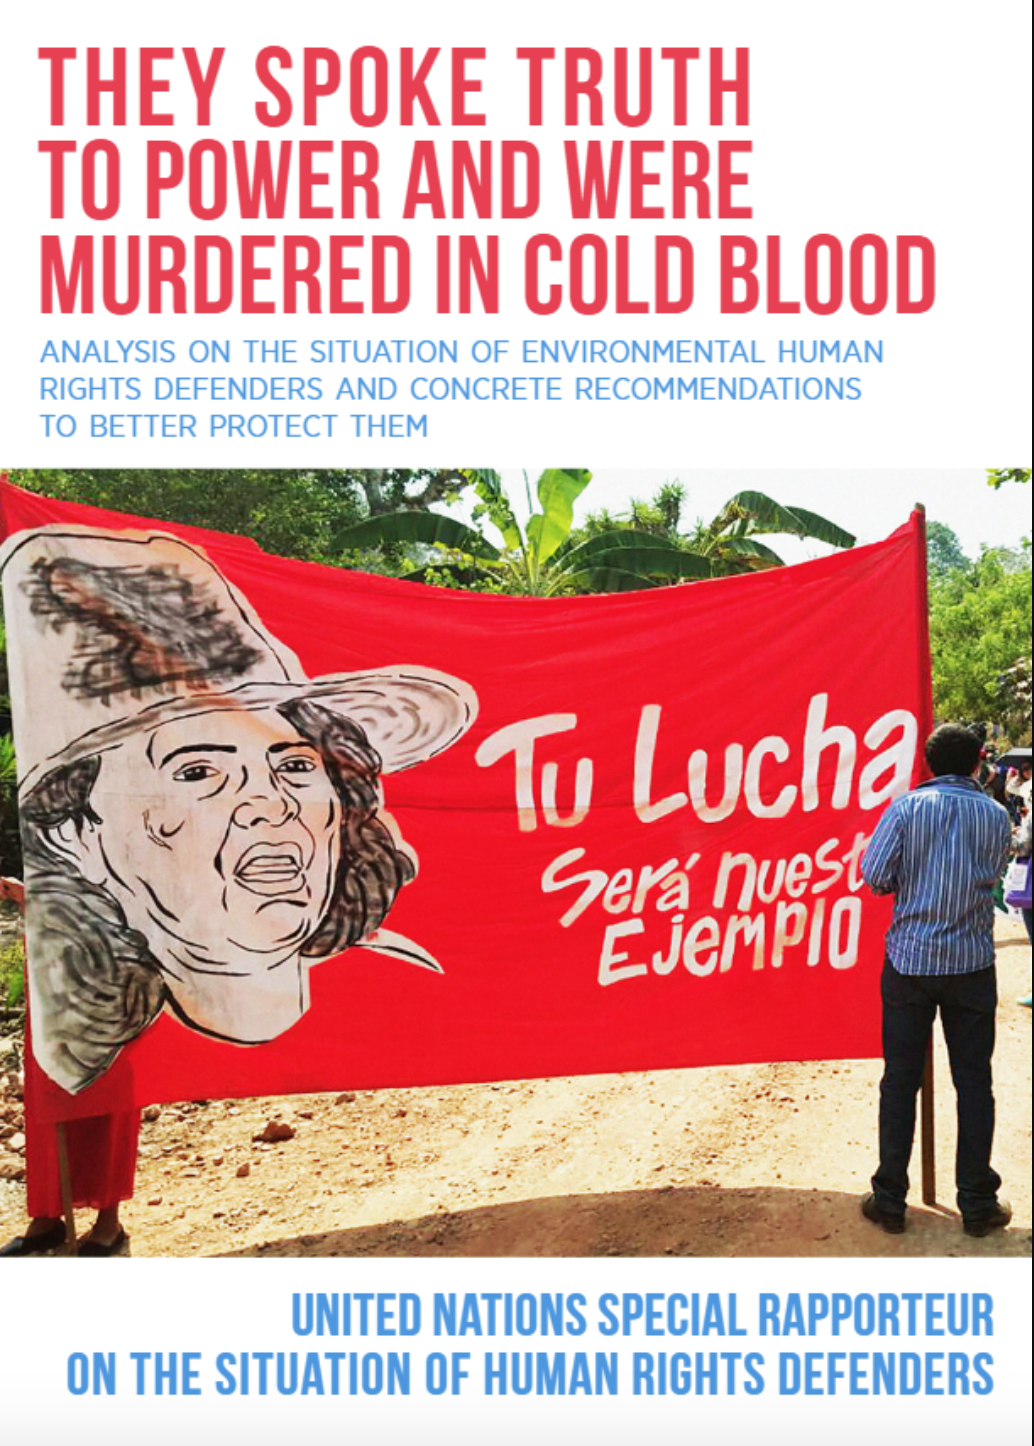 ‘They spoke truth to power and were murdered in cold blood:’ analysis on the situation of environmental human rights defenders and concrete recommendations to better protect them